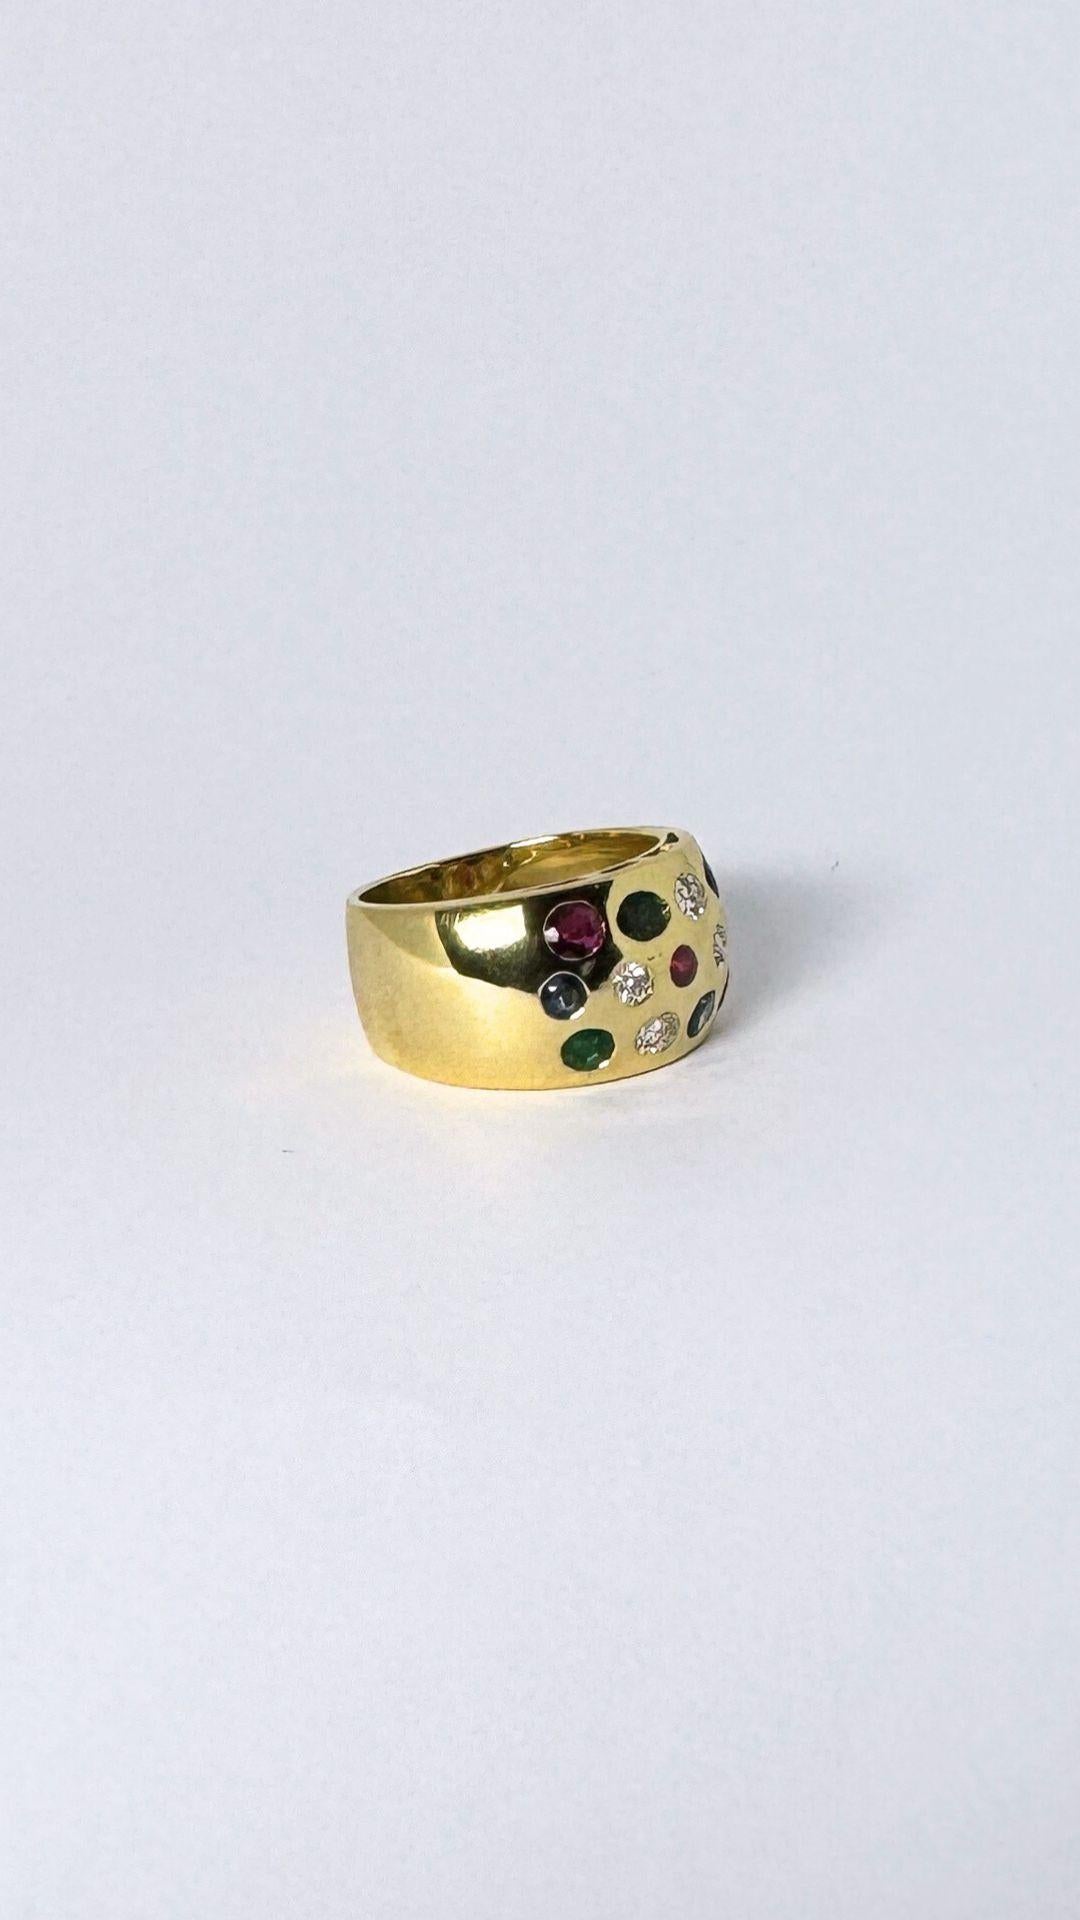 Cocktail ring made of 18 carat gold with diamonds, rubies, smaragd, sapphire For Sale 2